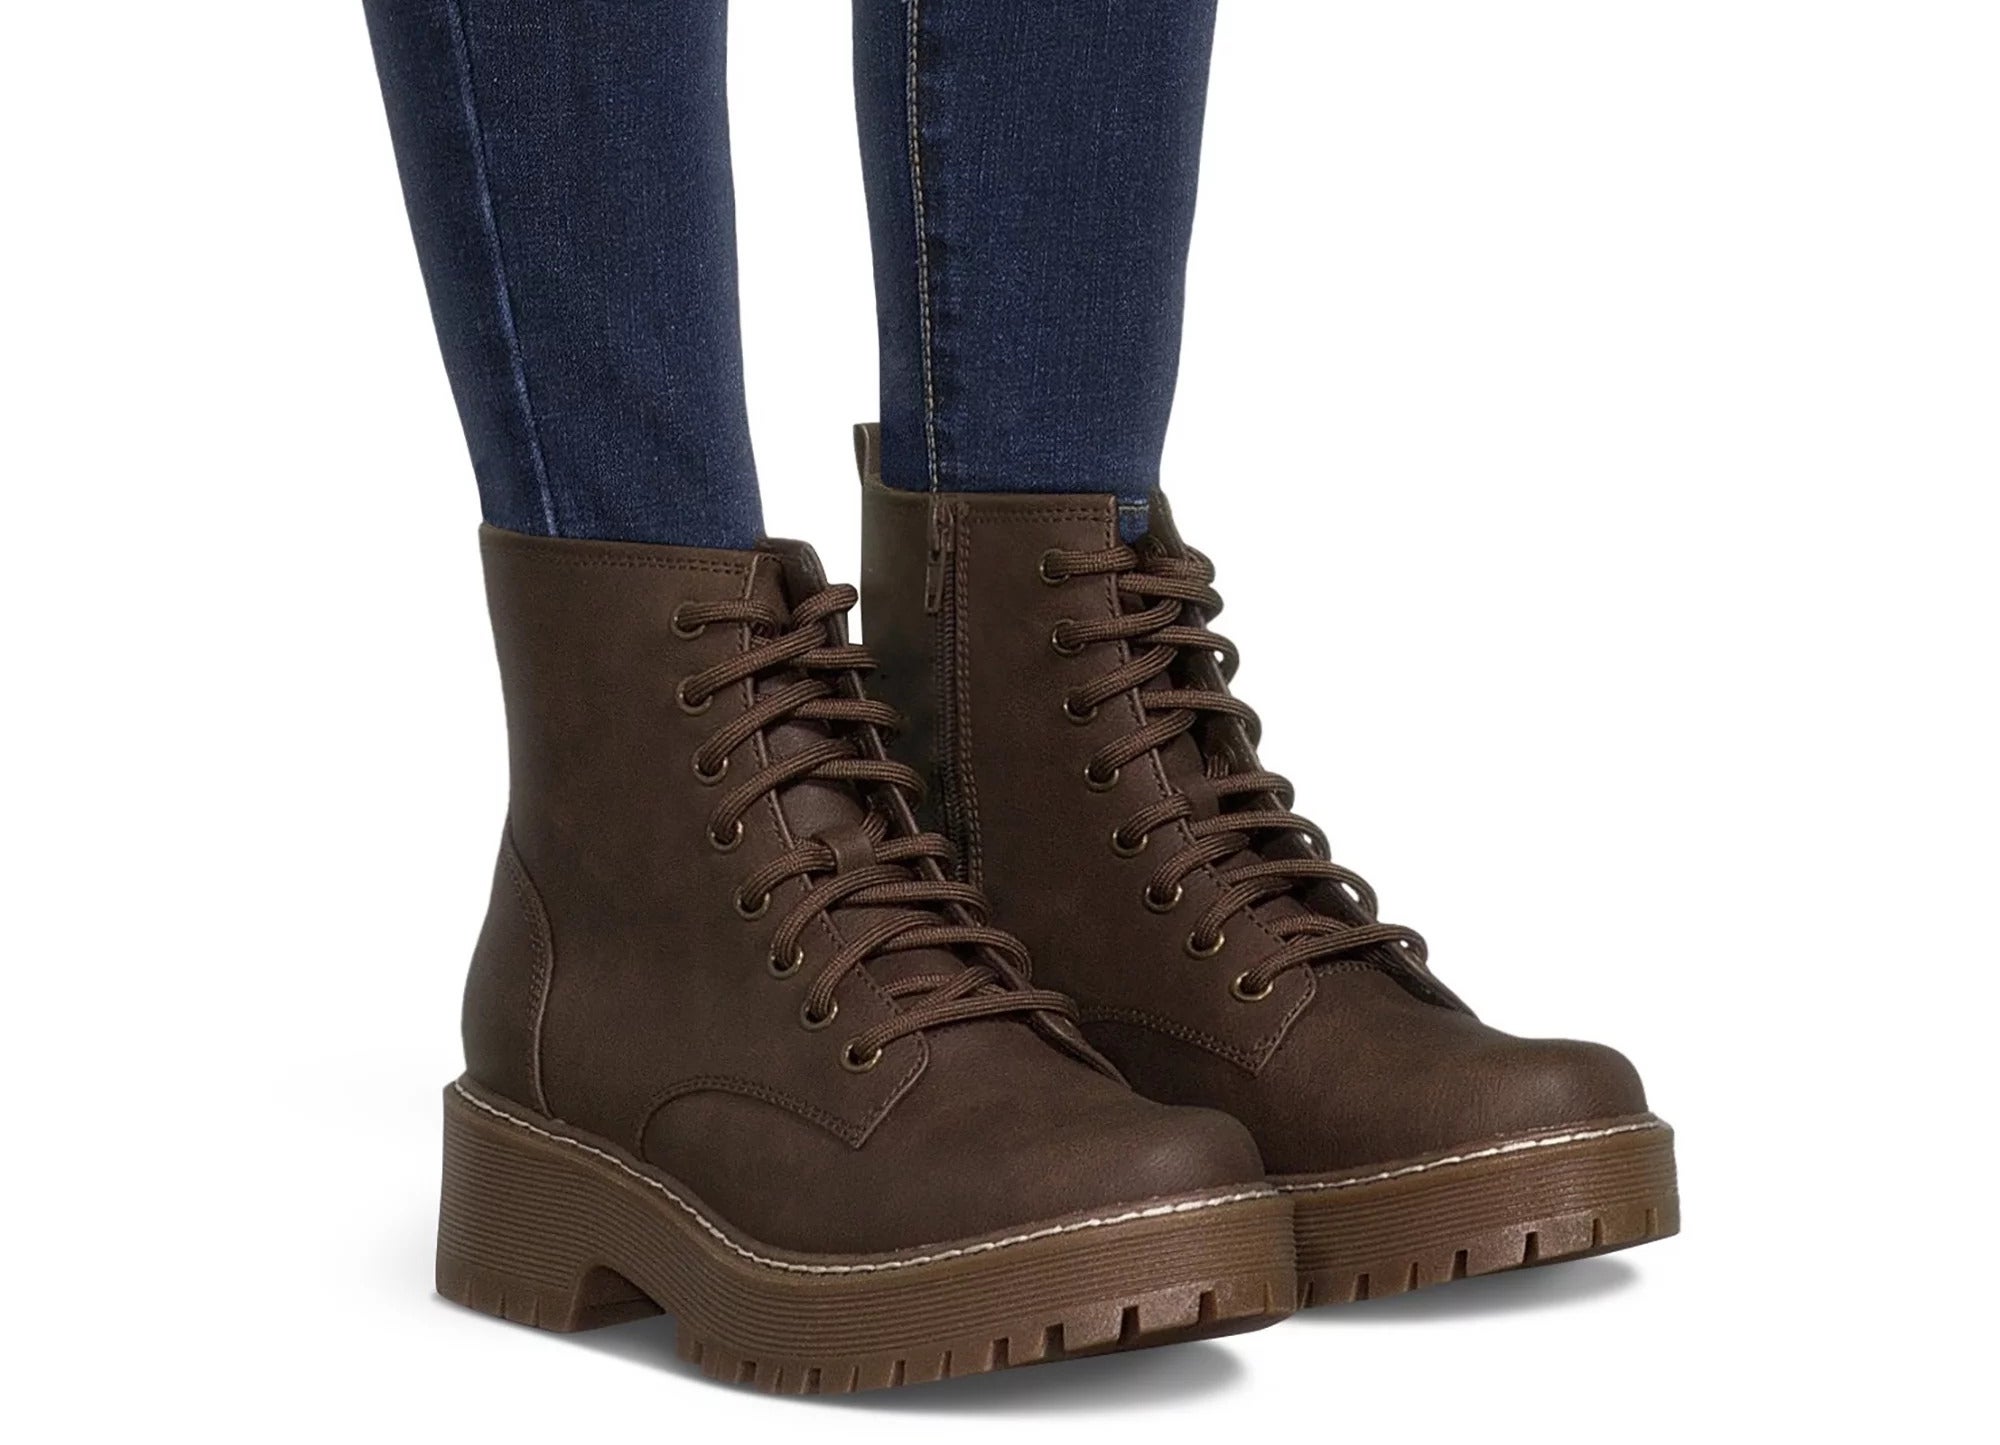 The boots in brown with lace-up design and side zips